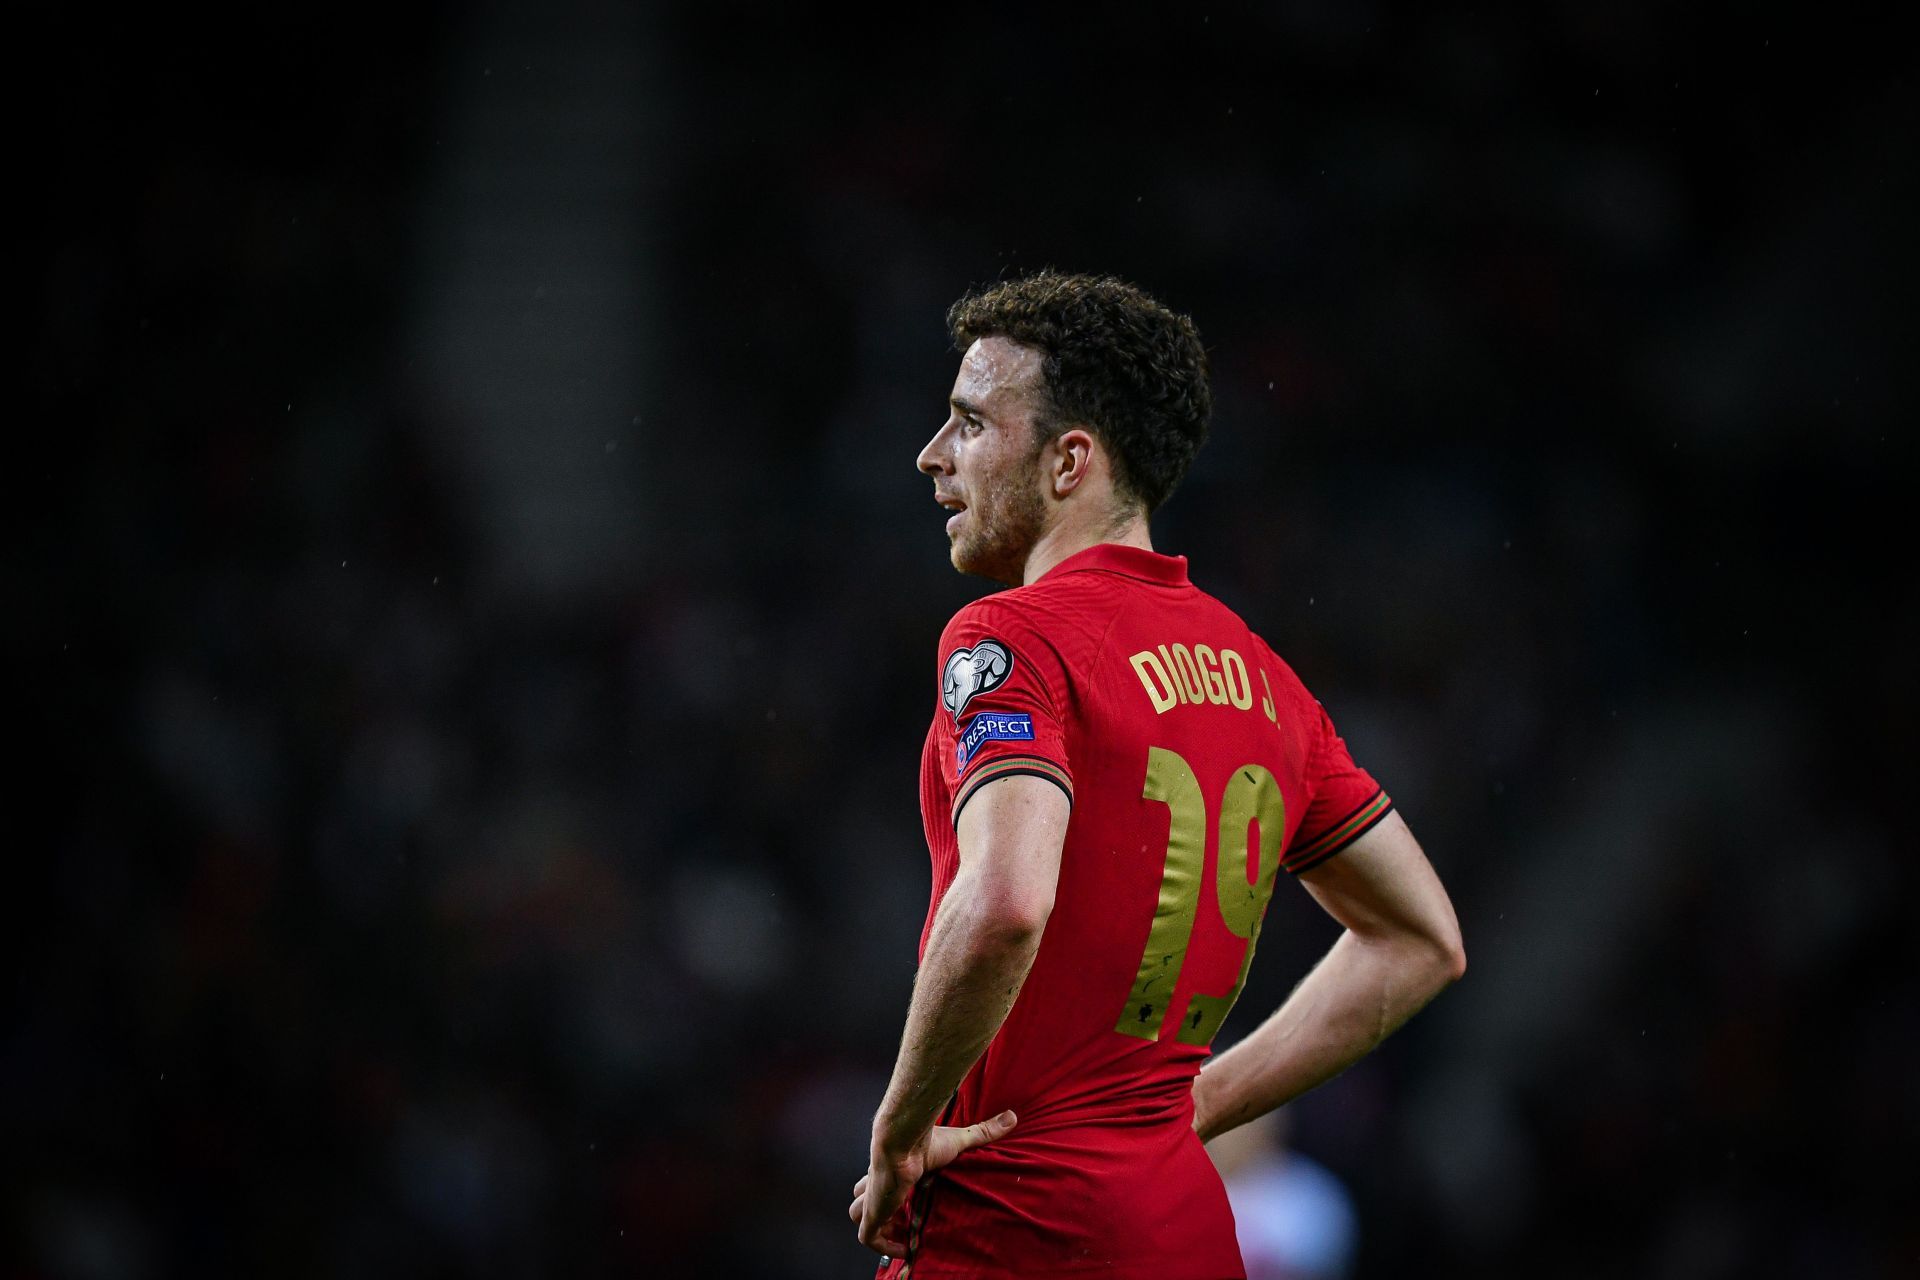 Diogo Jota has blossomed into an incredible important player for club and country.